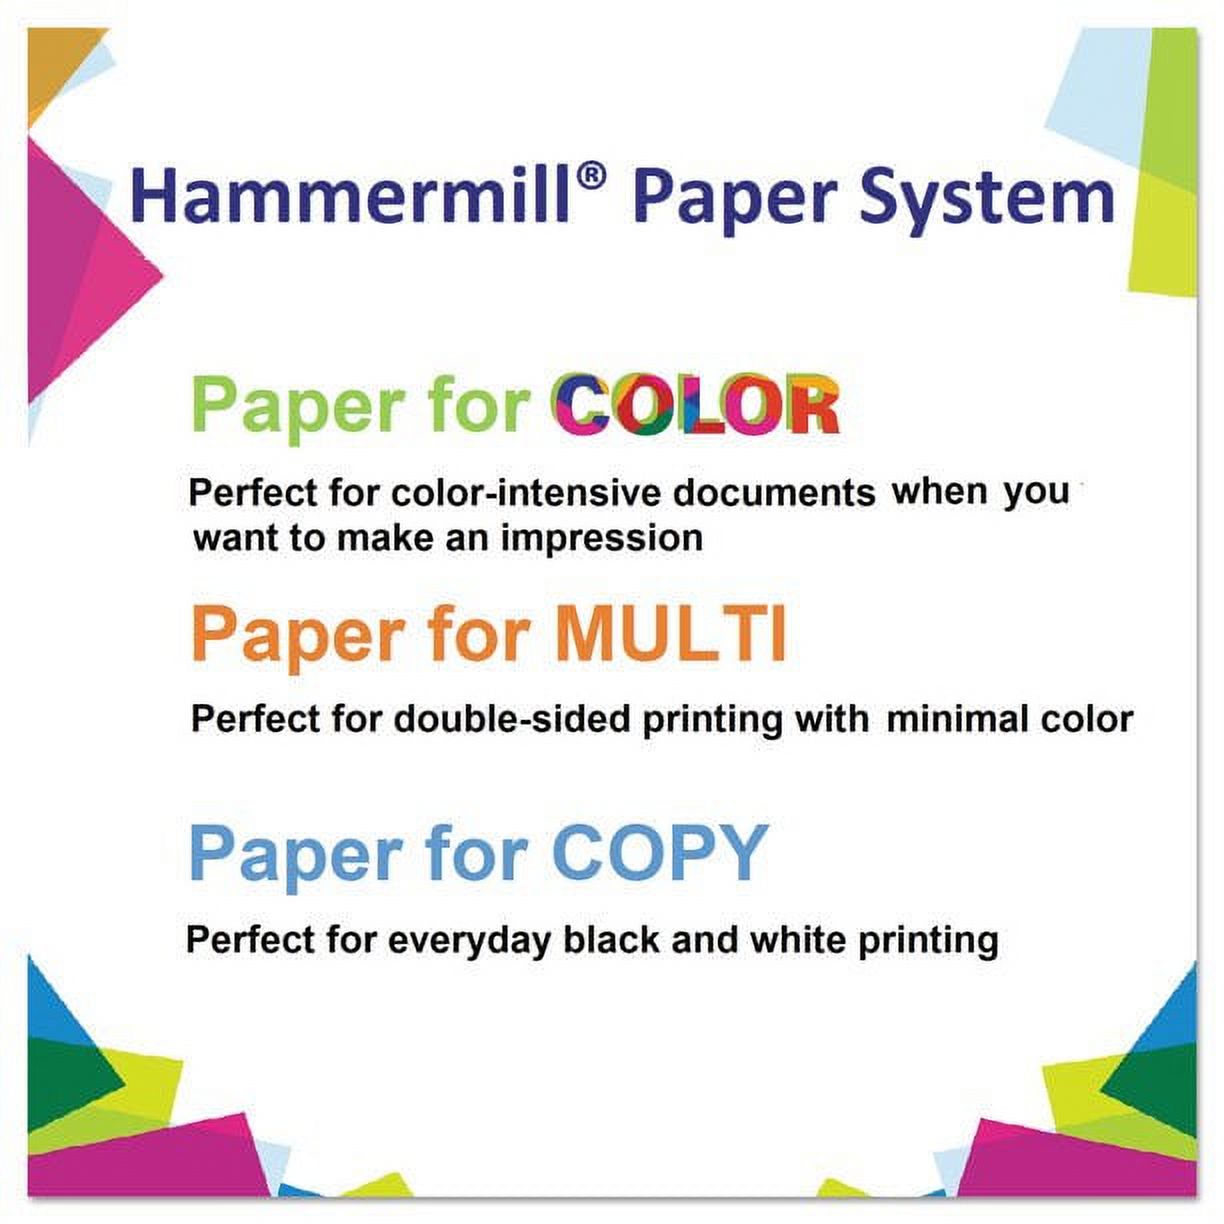 Hammermill Recycled Color Papers, 8.5" x 11", 500 Sheets - image 4 of 4